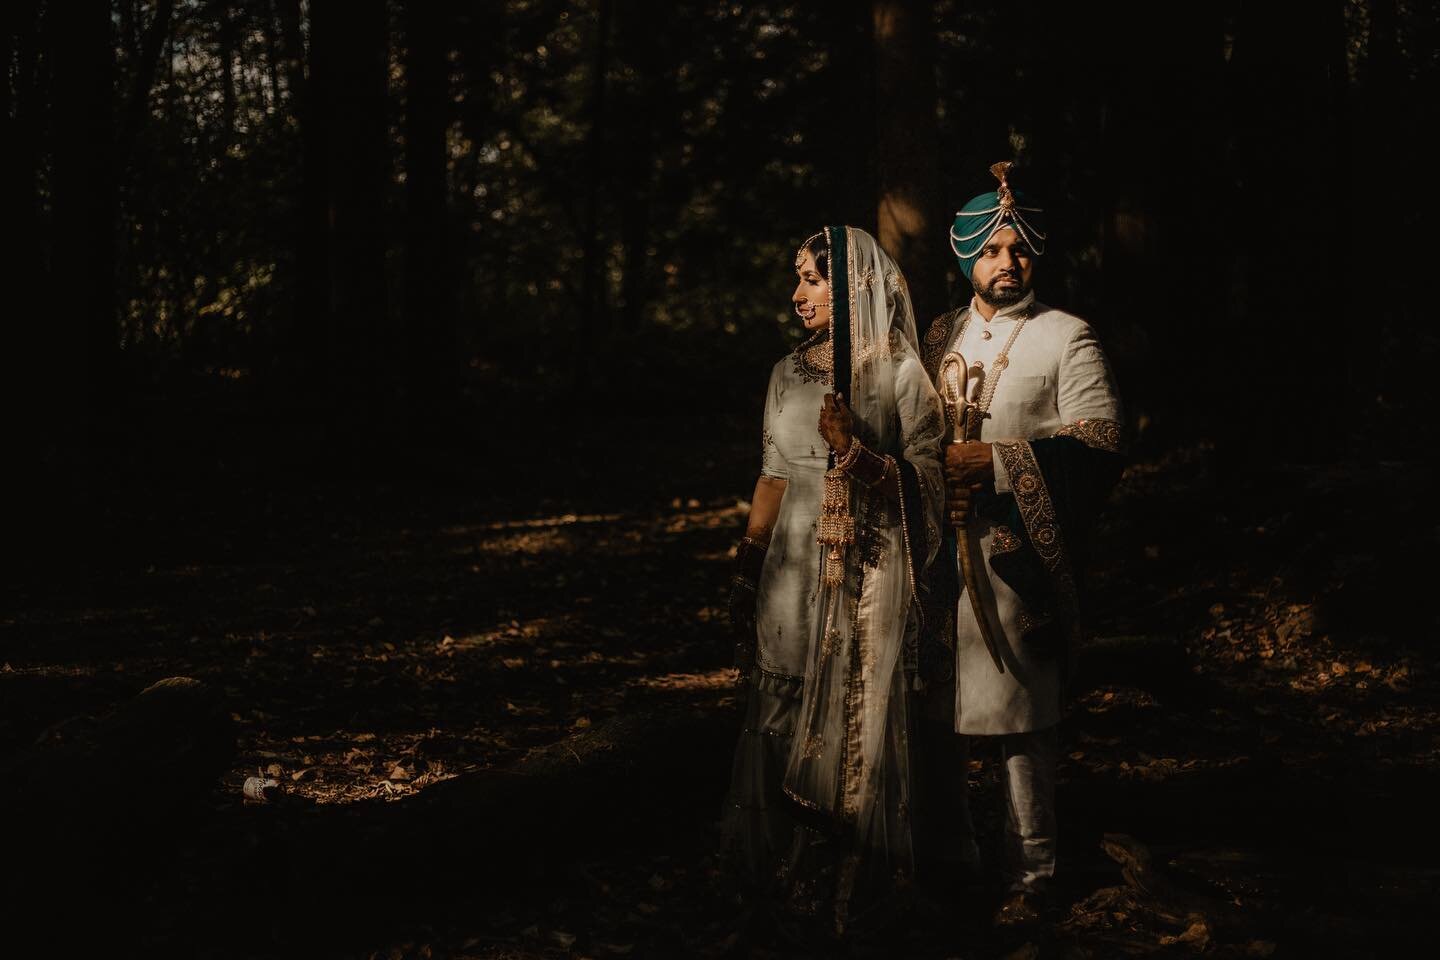 Still obsessed with these wedding photos 😍

So thankful to @shotbysharan for choosing me to second shoot with her for weddings and other shoots. I will forever be grateful for the opportunities I&rsquo;ve experienced with her ❤️